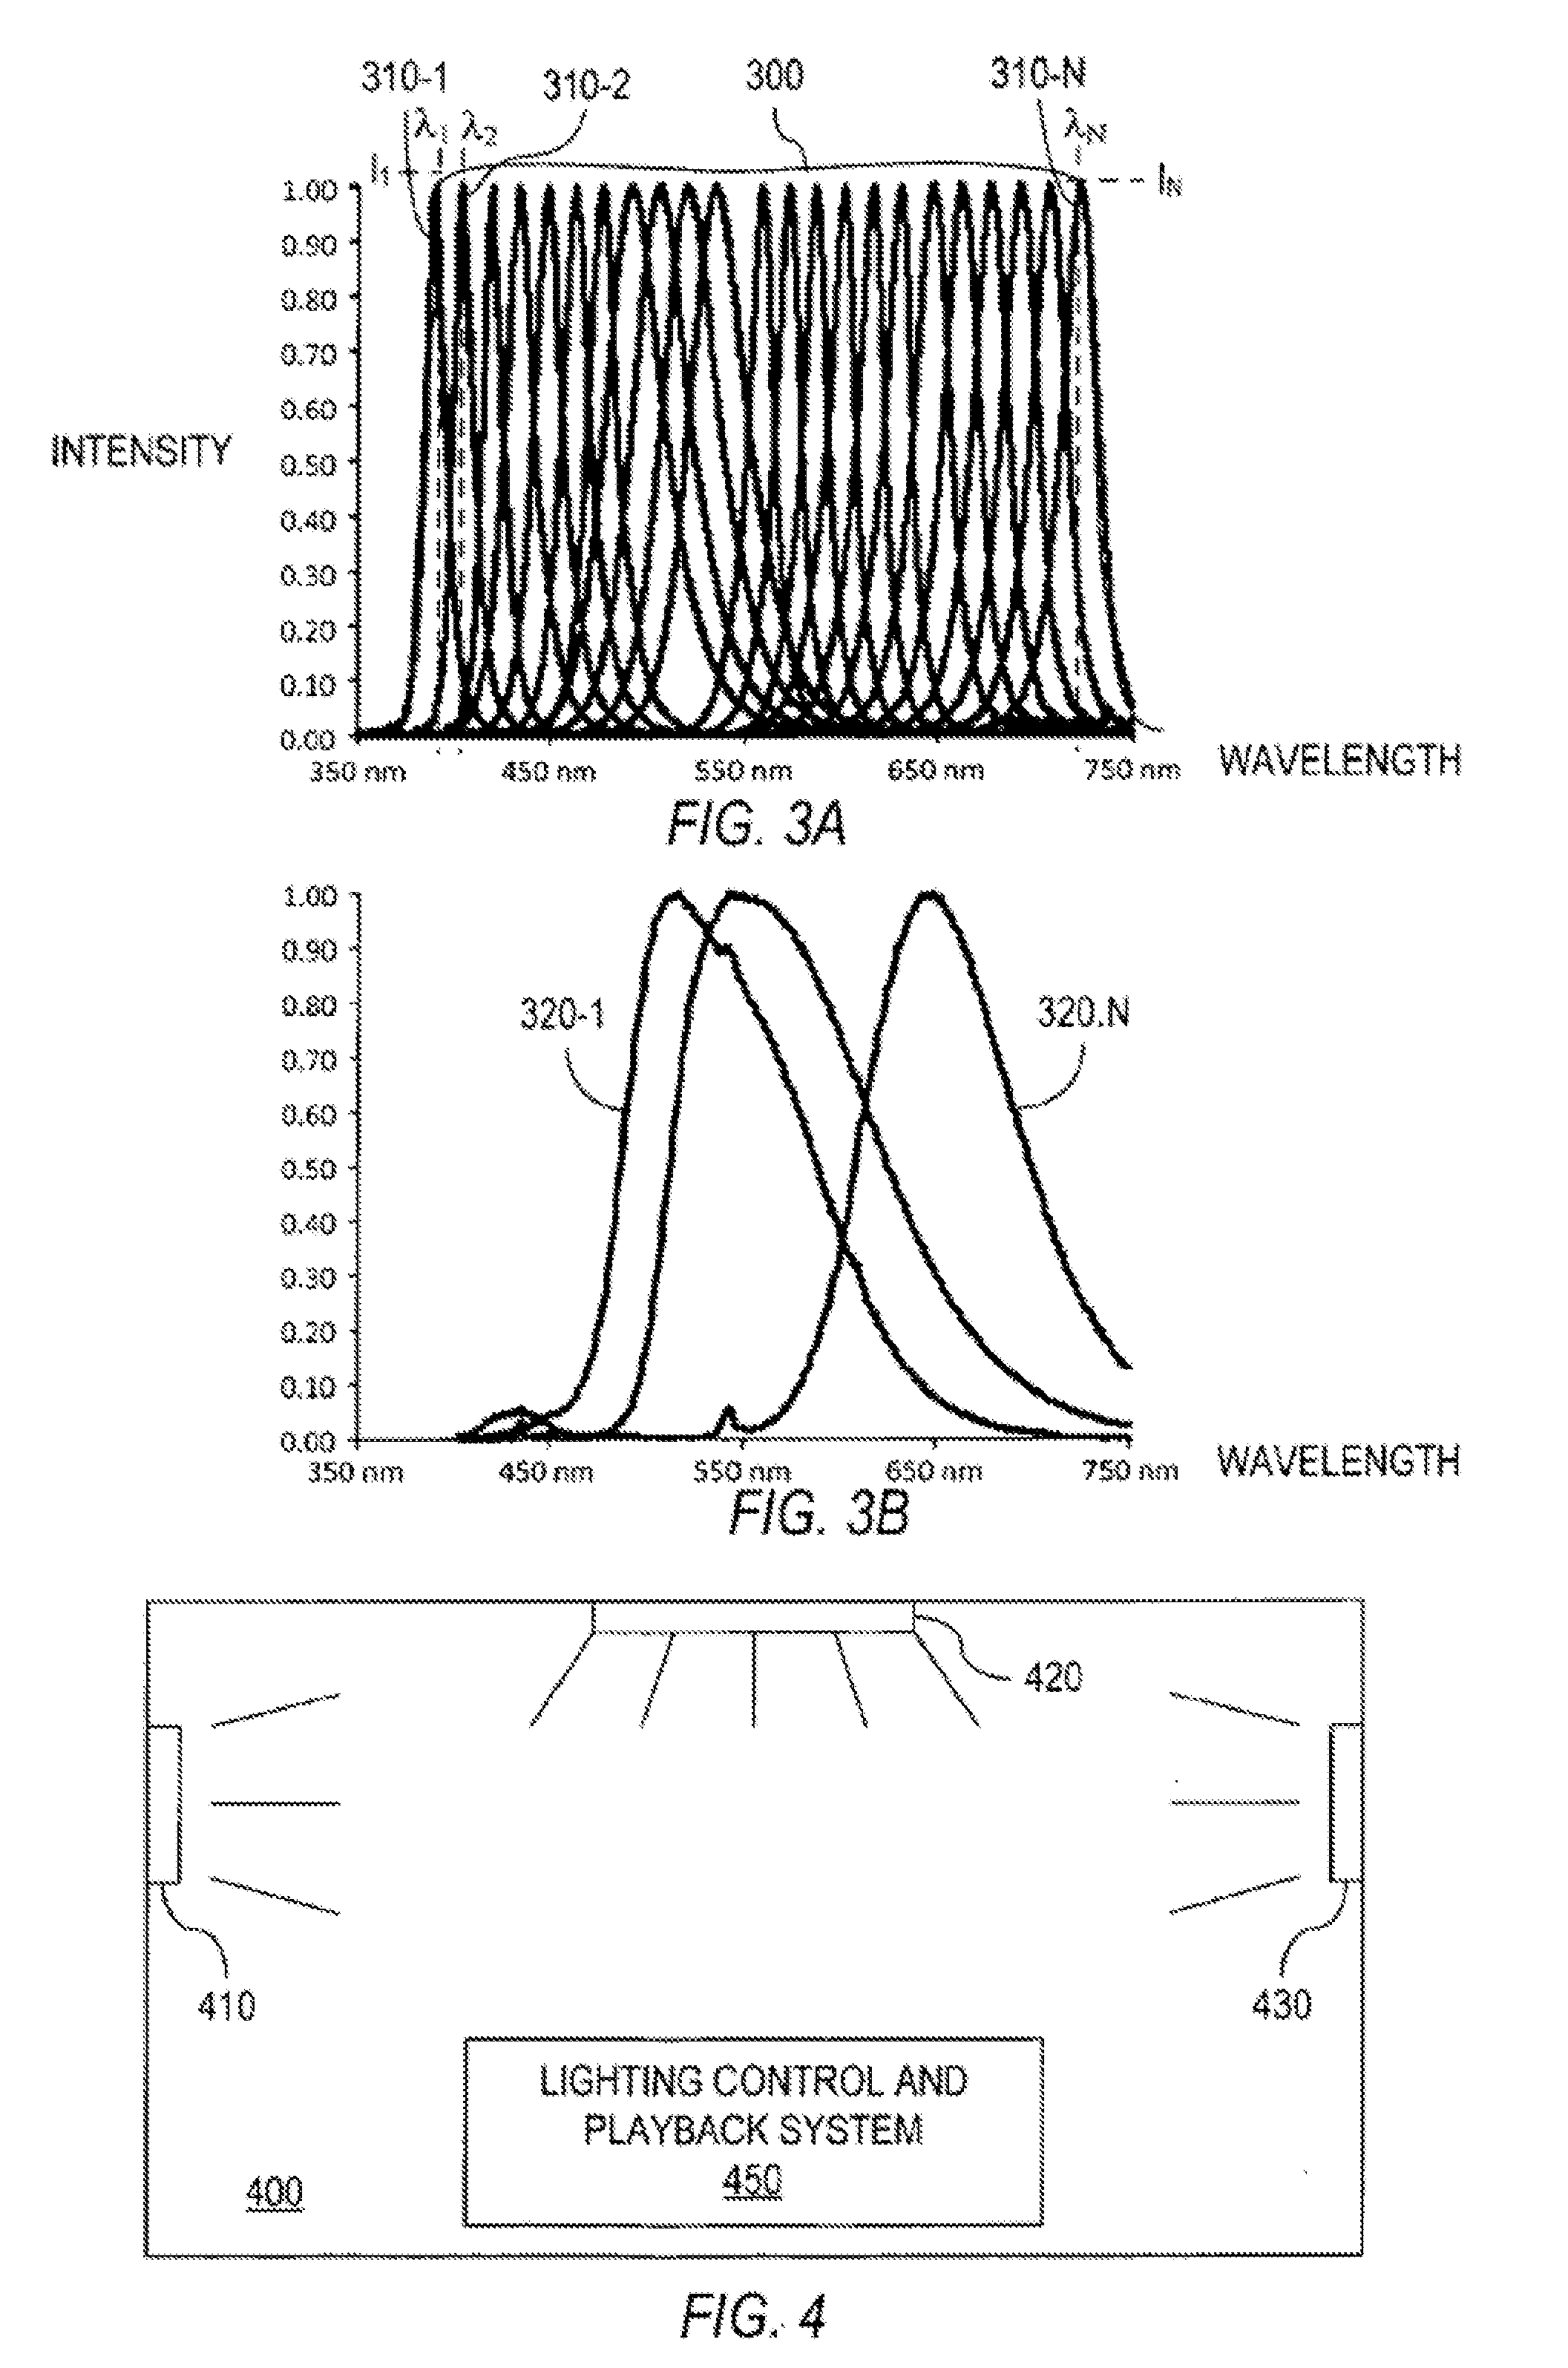 Systems and Methods for Developing and Distributing Illumination Data Files